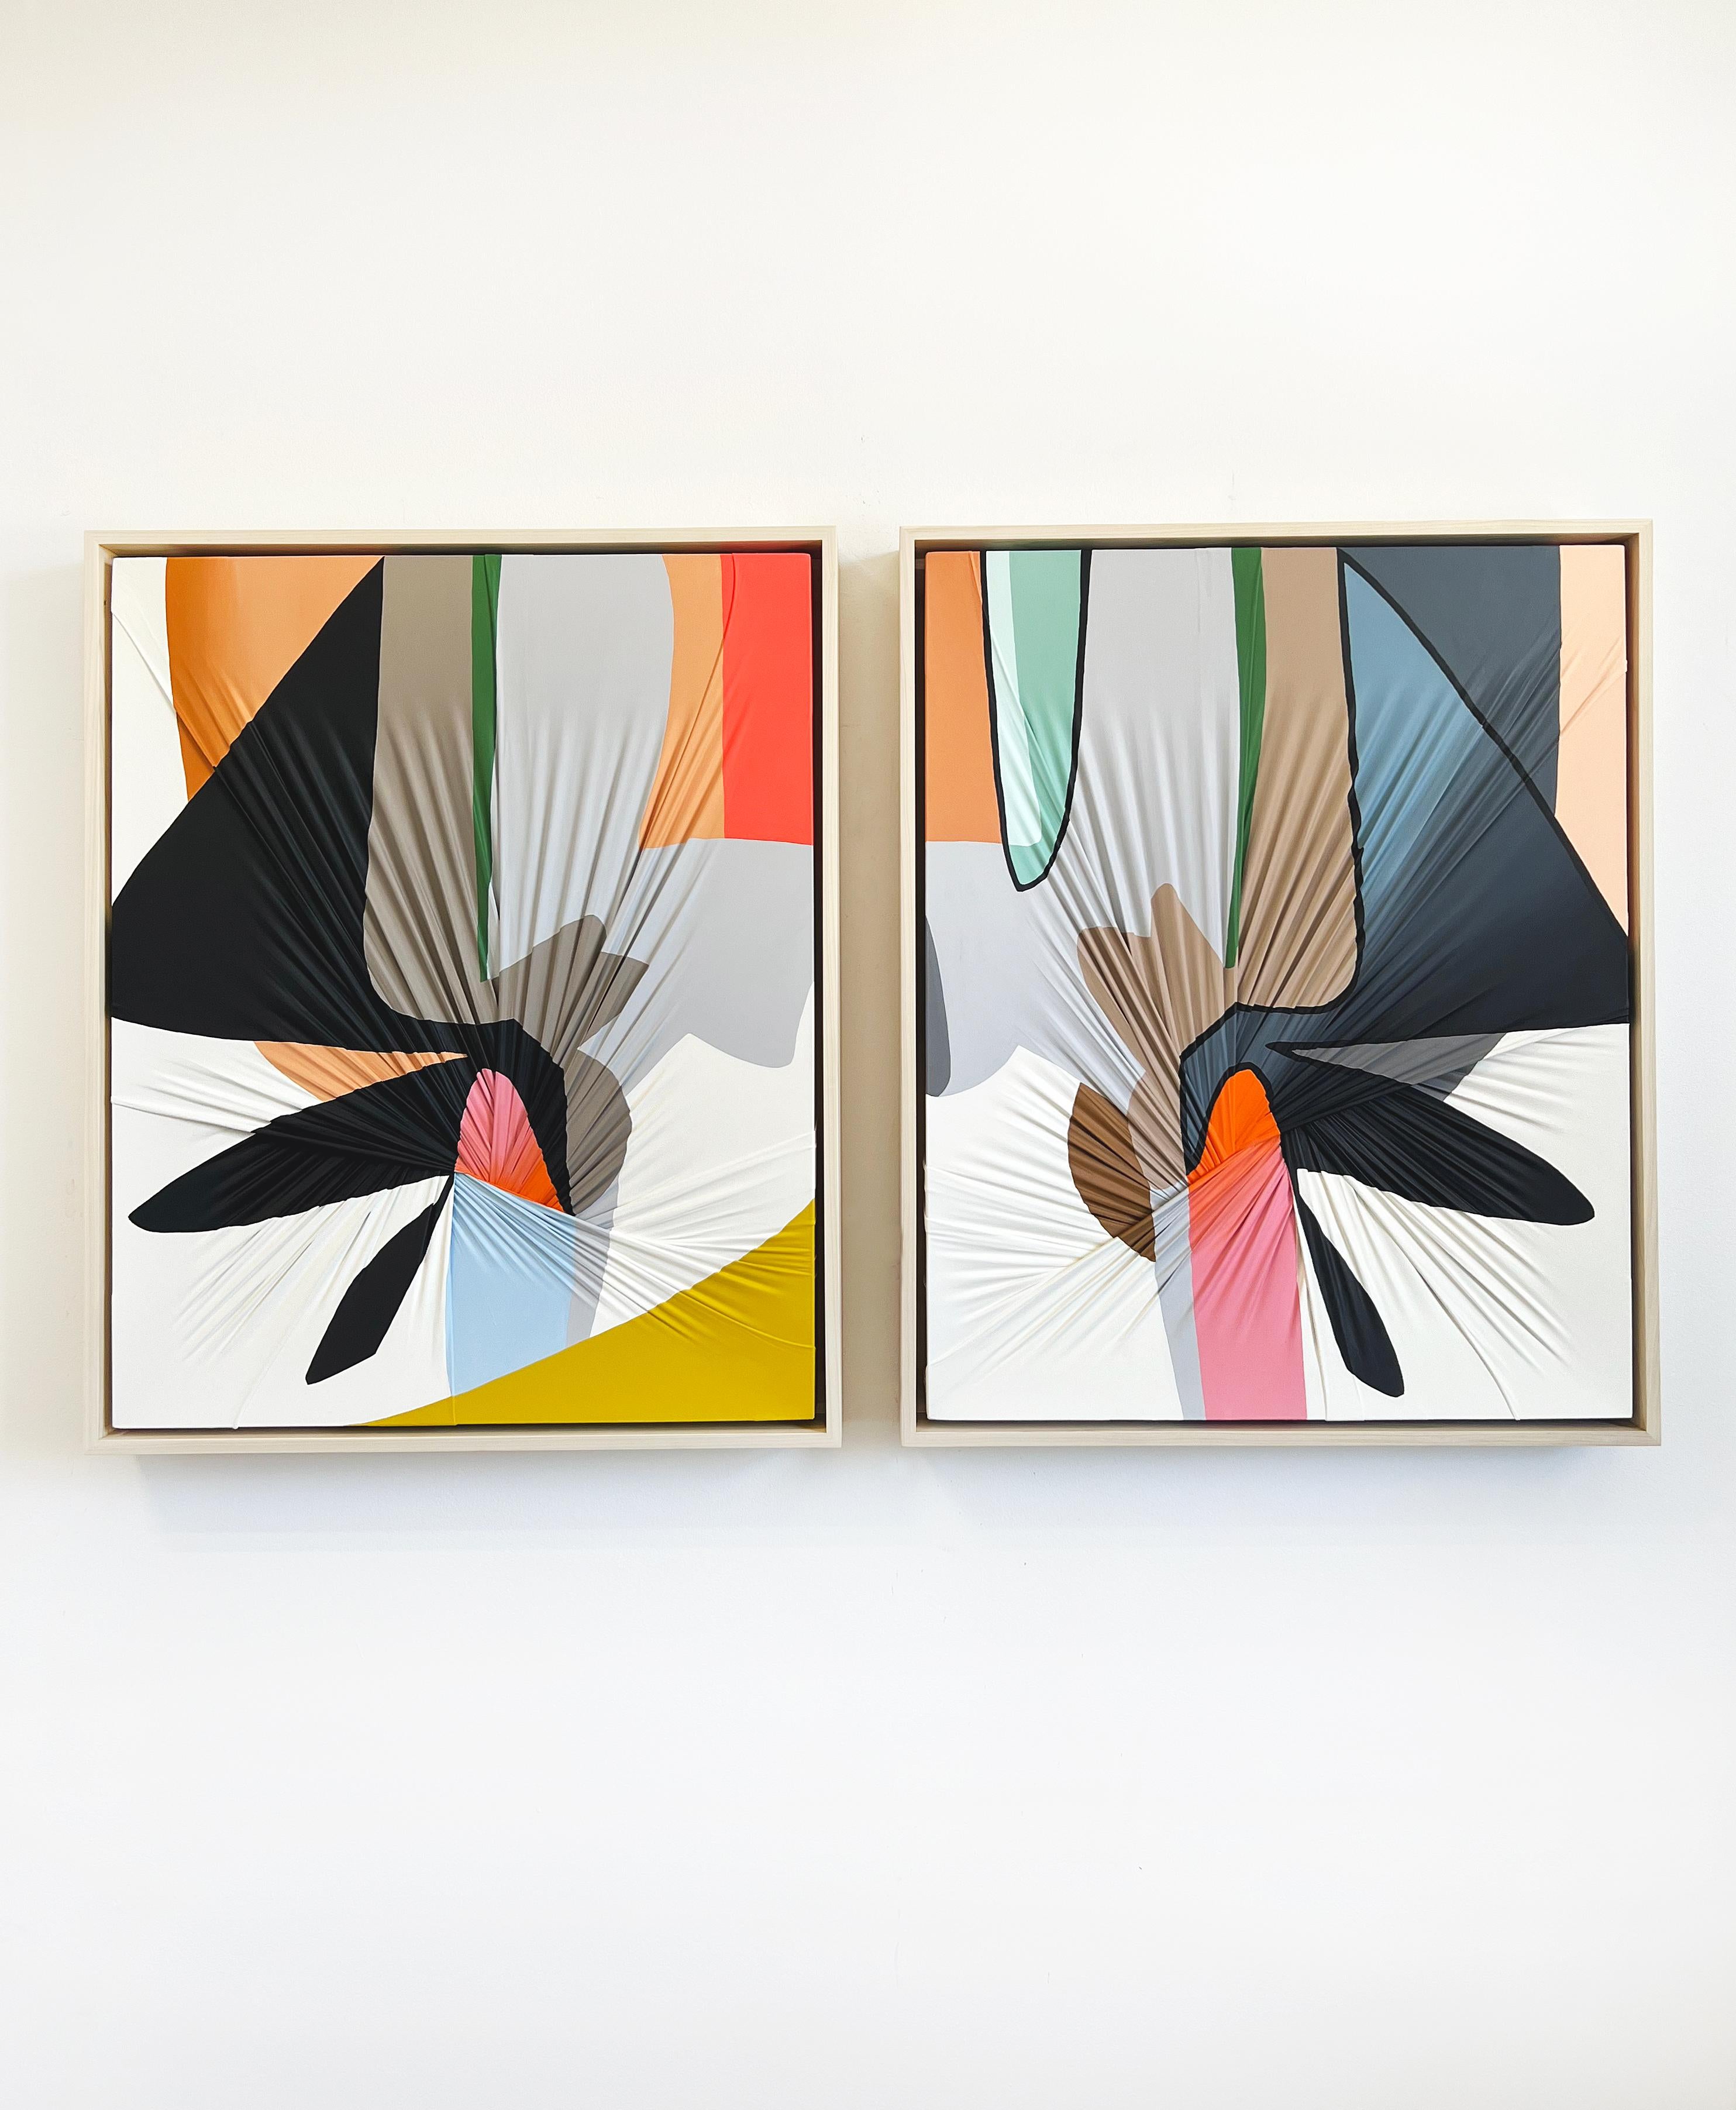 Carrie Gillen Abstract Painting - Abstract_Stretched Fabric_Wall Sculpture_Textile_CarrieGillen_Matchstick Diptych